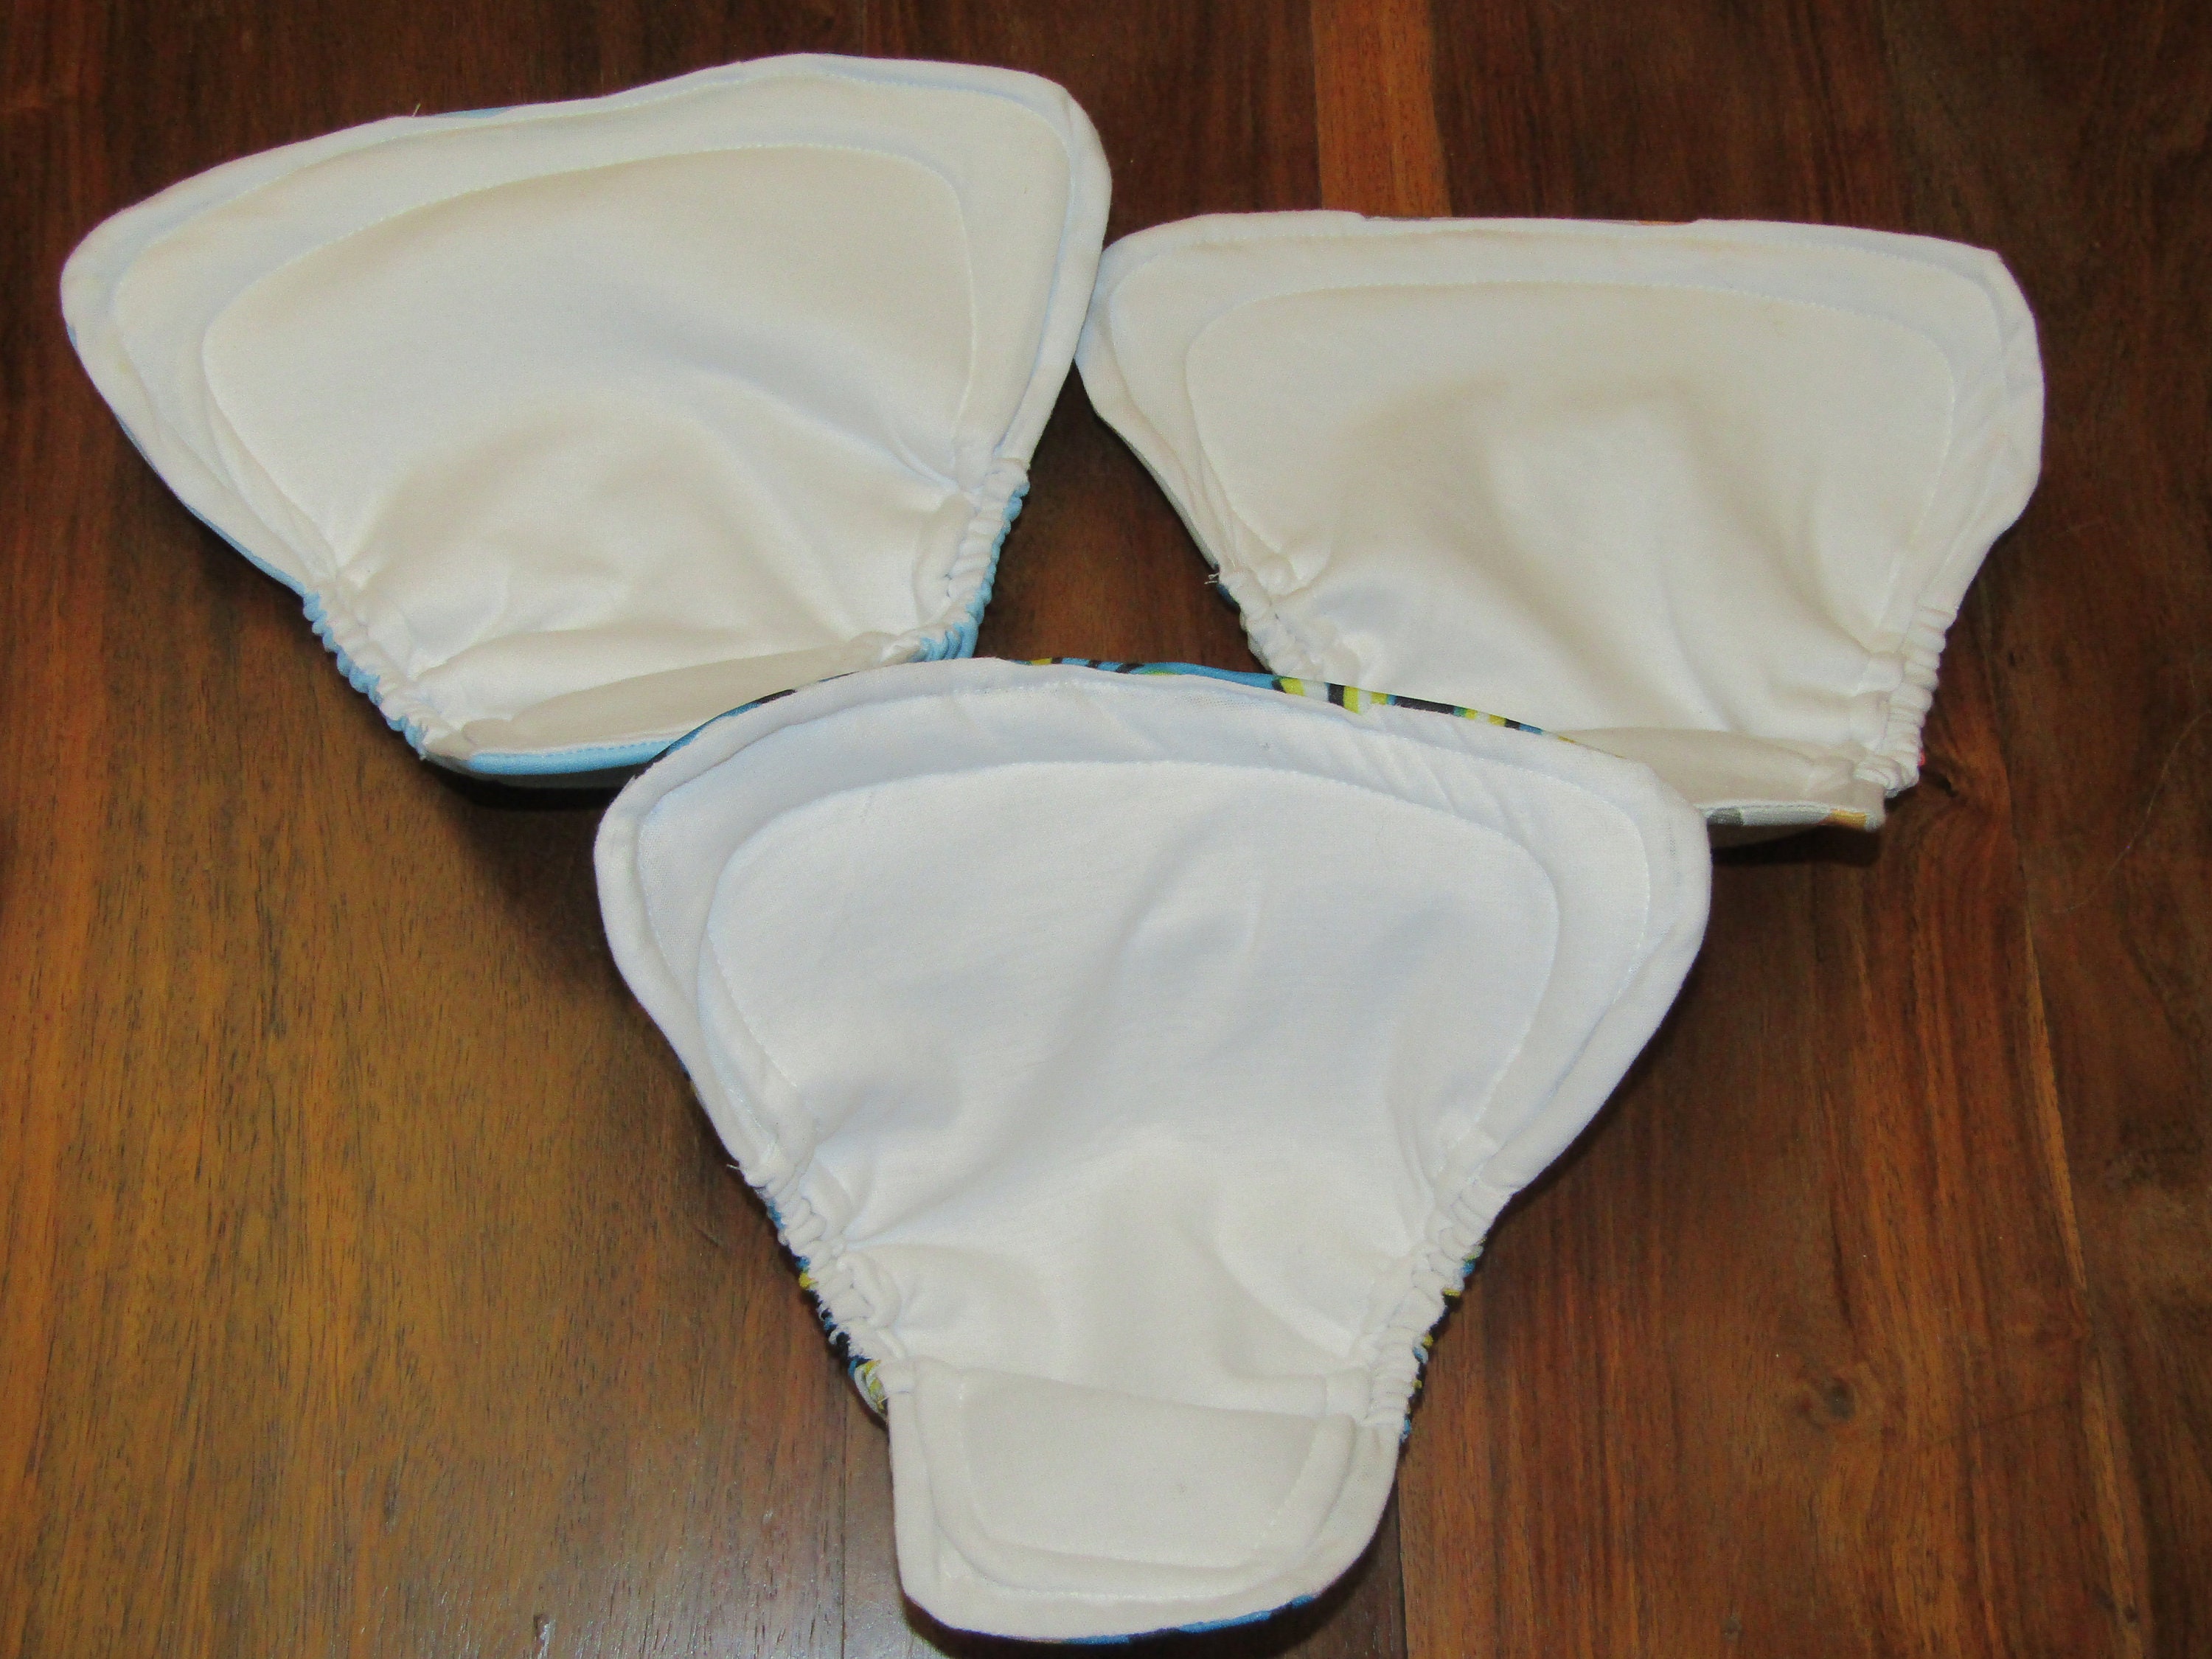 Buy 3 Pack Men's Reusable Incontinence Pads FREE Delivery Online